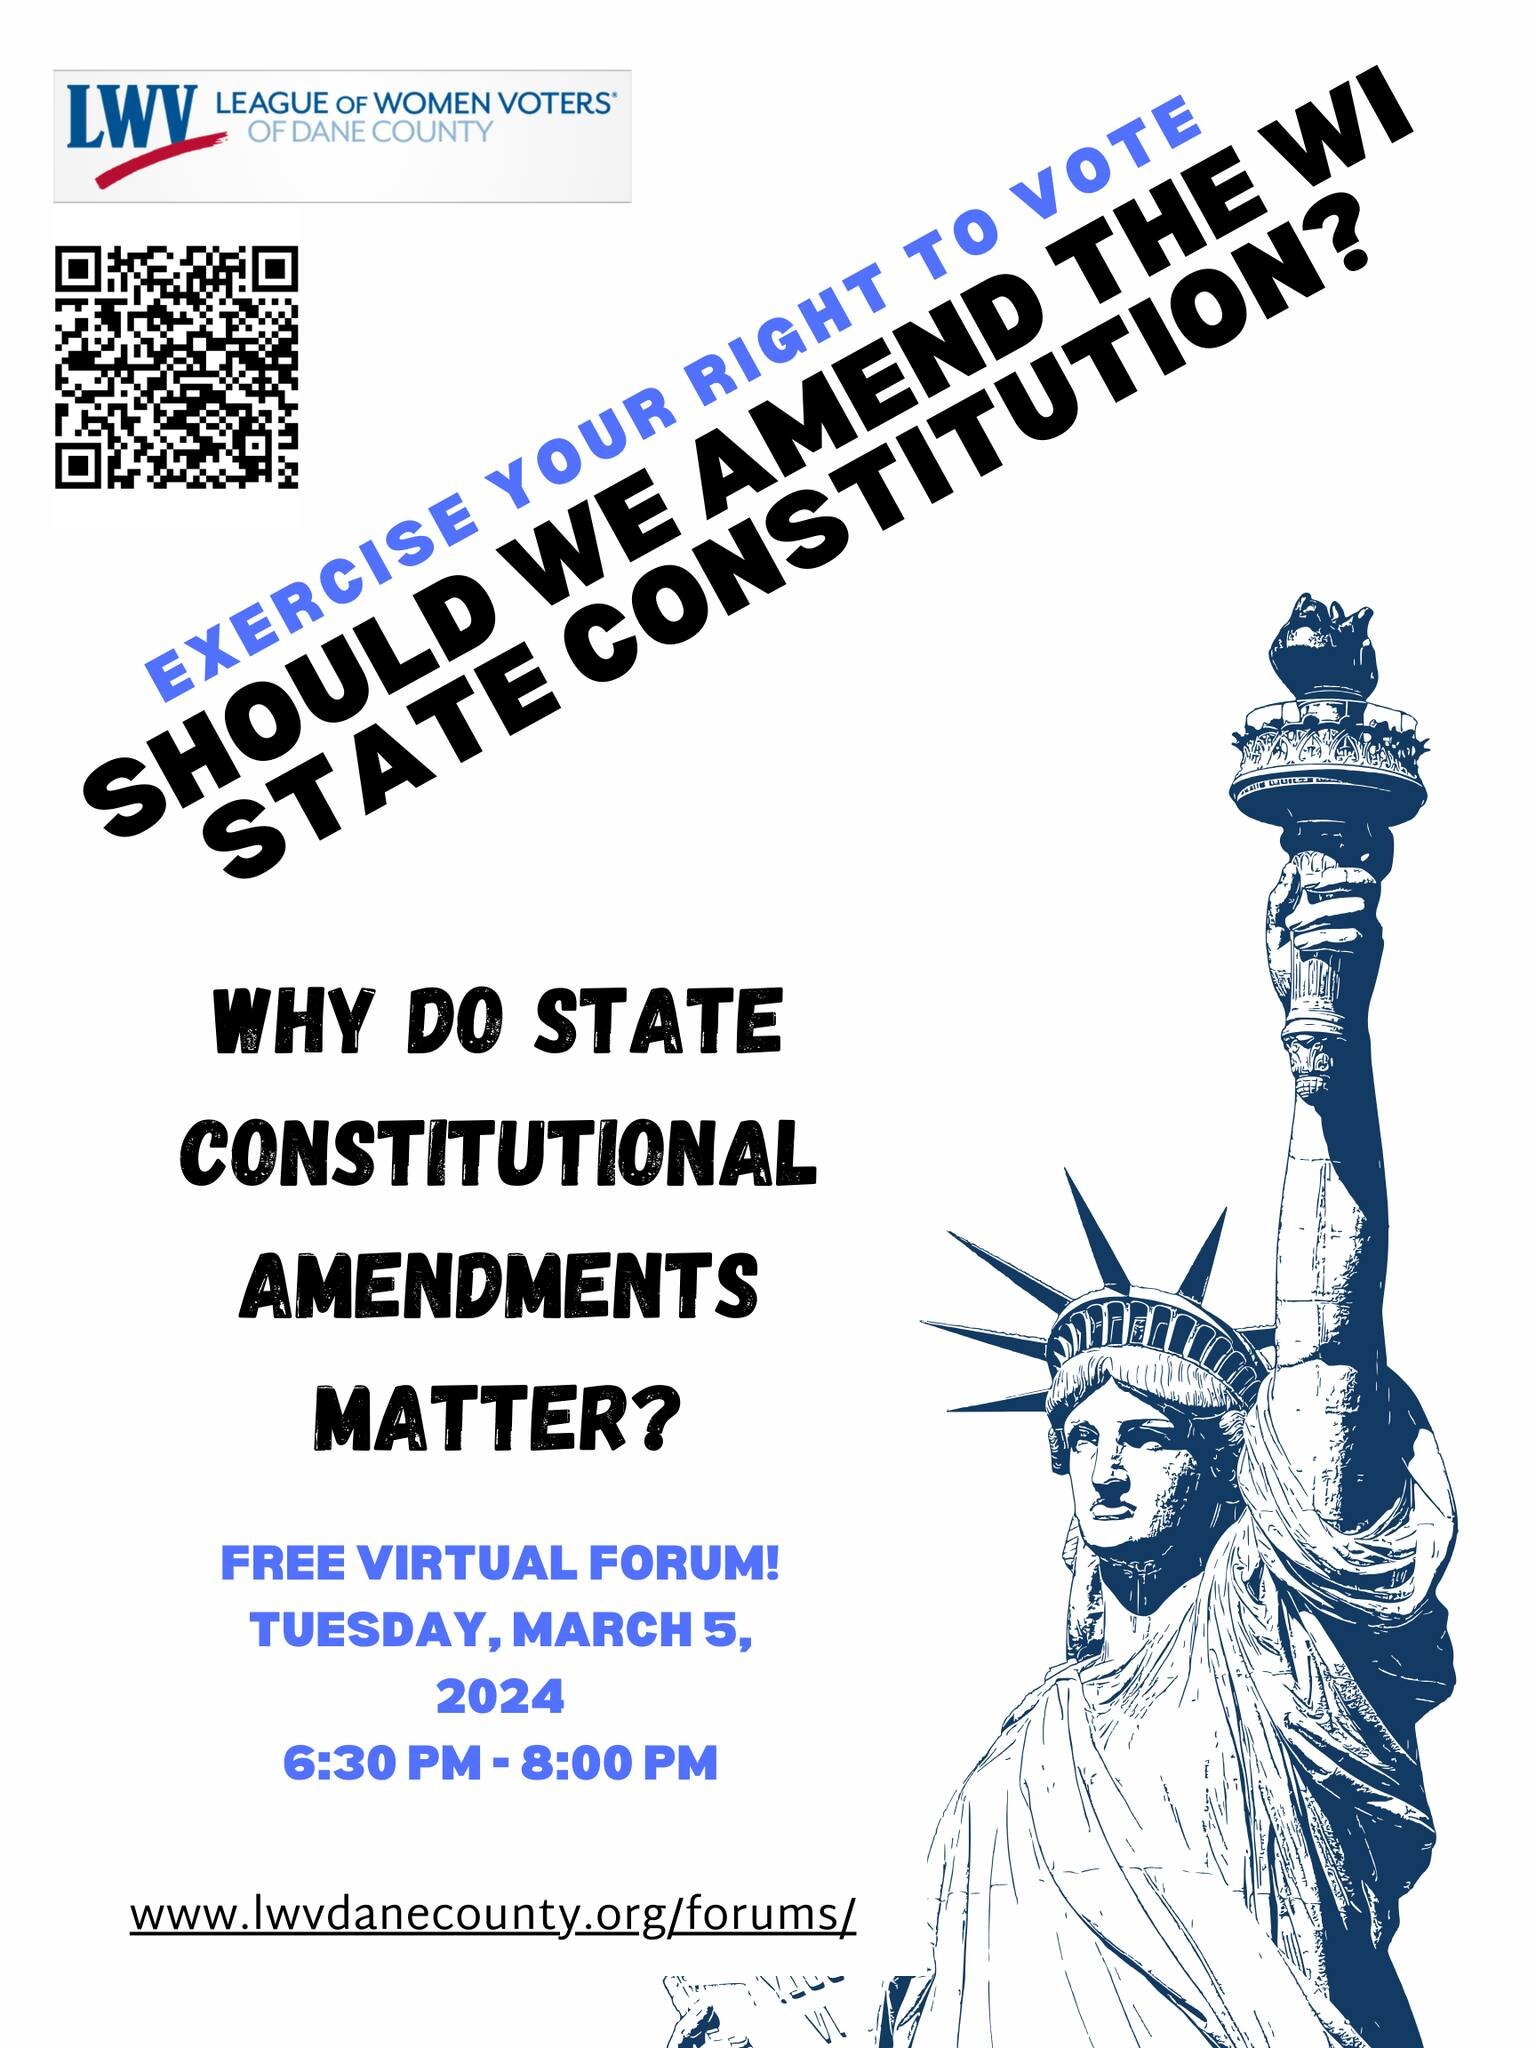 Why Do State Constitutional Amendments Matter?
Tuesday, March 5, 2024 6:30 PM  8:00 PM
Virtual Hosted by Dane County LWV
Two proposed amendments to the state constitution regarding election administration will be on the April 2 ballot . This forum wi